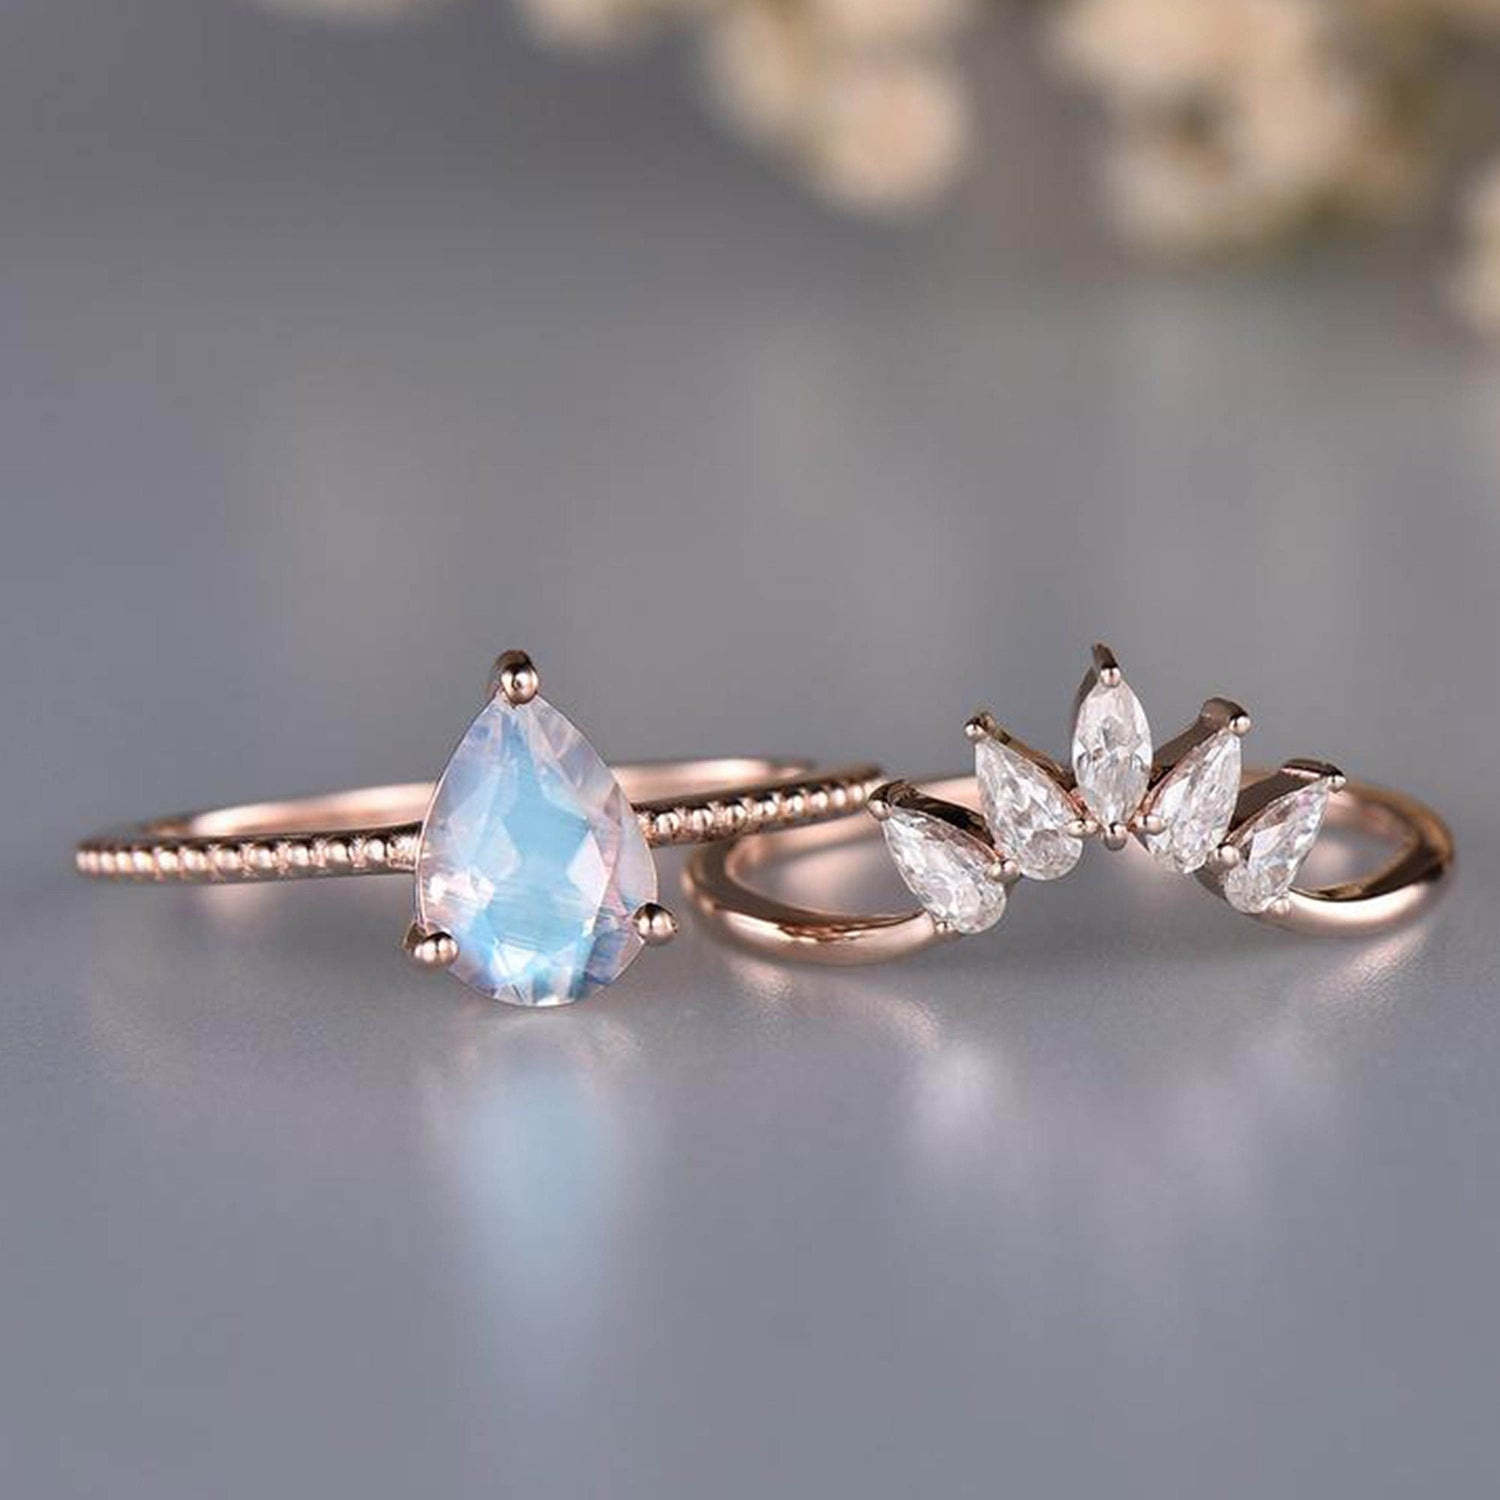 Moonstone Ring Set \ Natural Blue Moonstone and White Topaz Stackable Ring \ 925 Sterling Silver Gold Vermeil Ring \ Rose Gold Ring